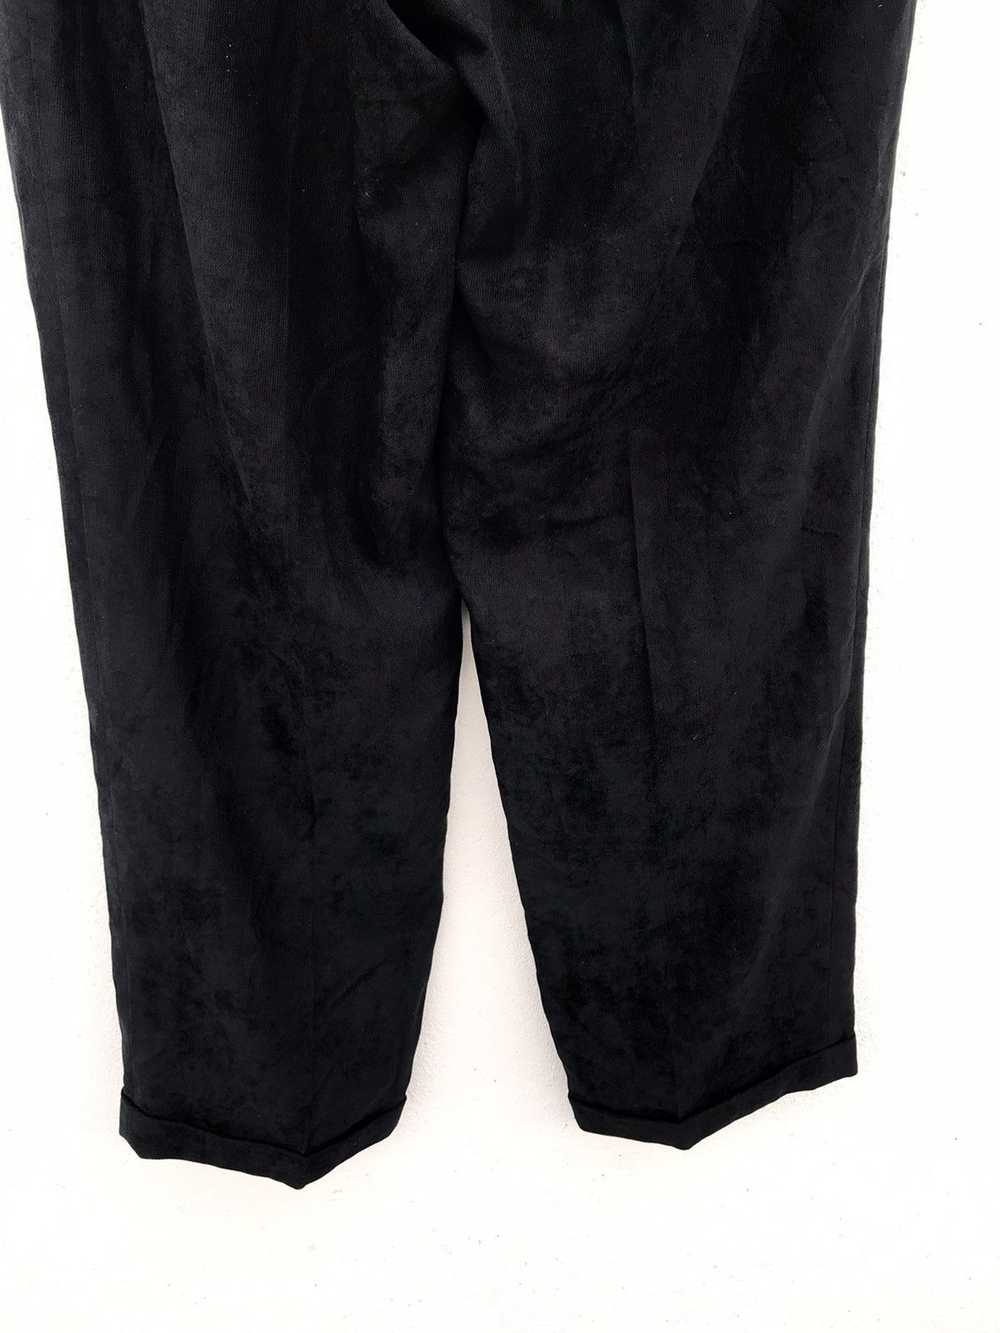 Japanese Brand Marie Claire Corduroy Pants - image 8